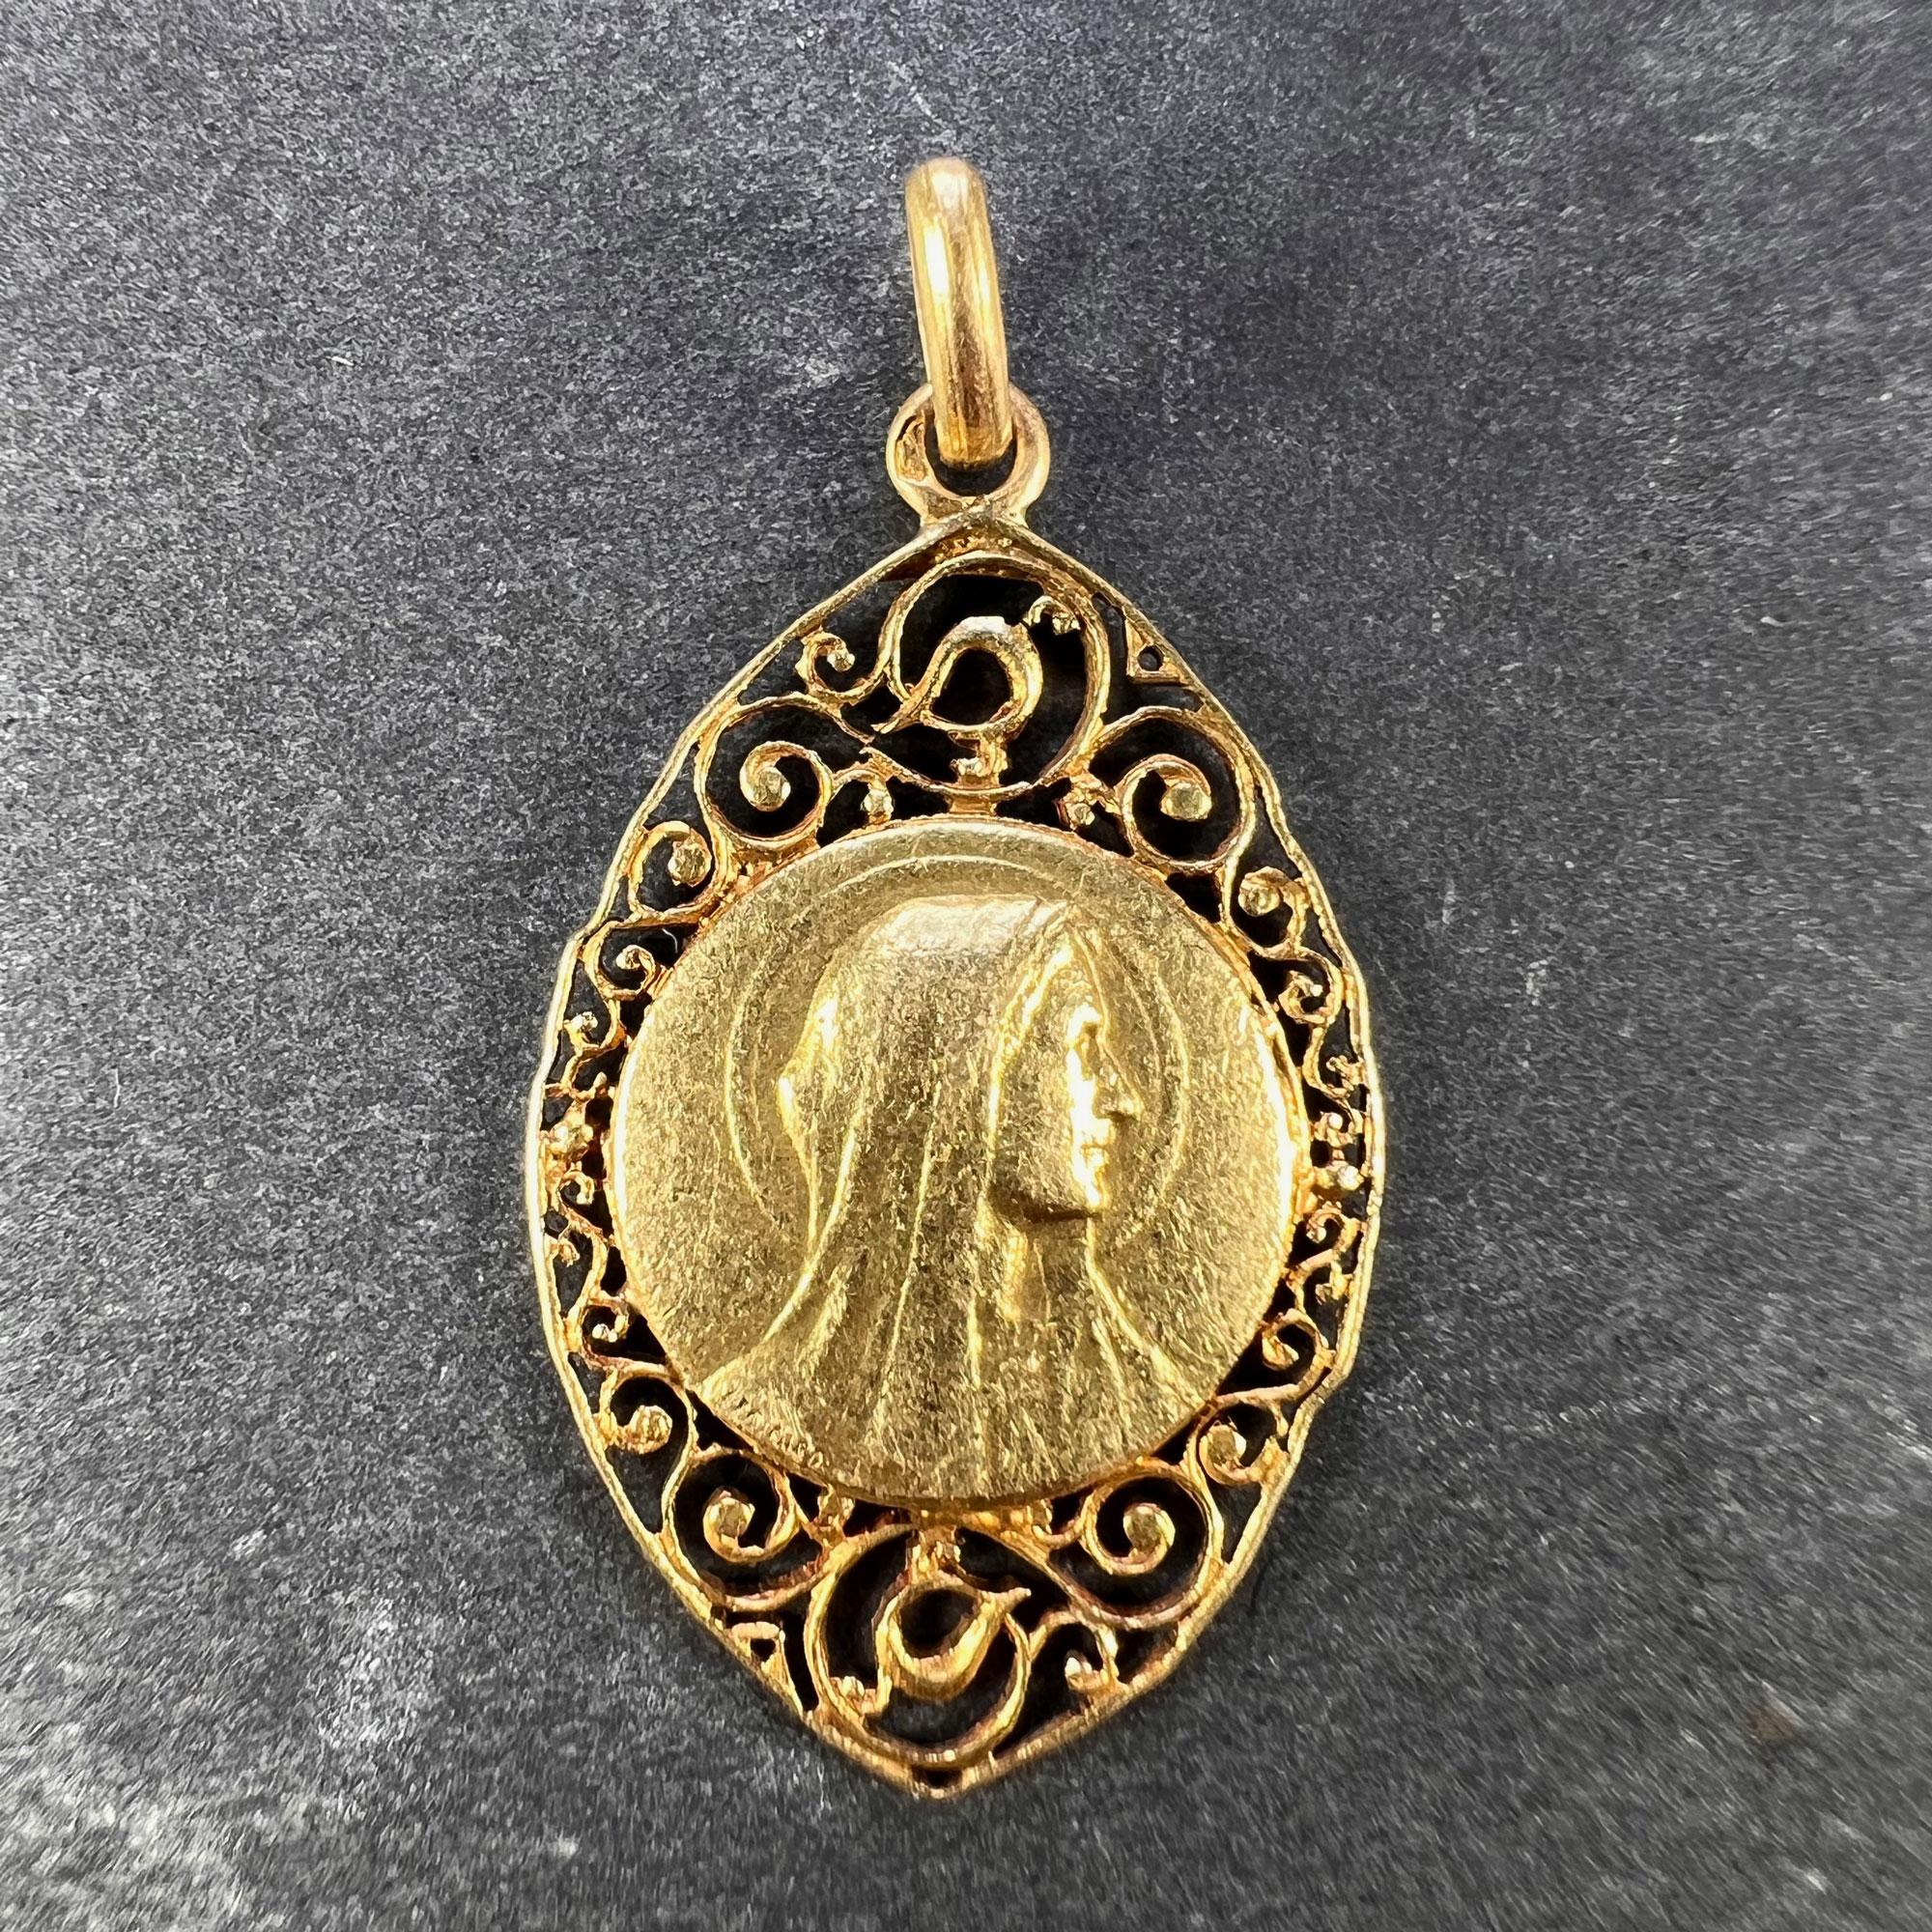 A French 18 karat (18K) yellow gold charm pendant designed as a round medal depicting the Virgin Mary within a navette shaped frame with pierced curliques, engraved with a monogram for JD to the reverse. Signed L. Tricard and P.L.Dasset. Unmarked